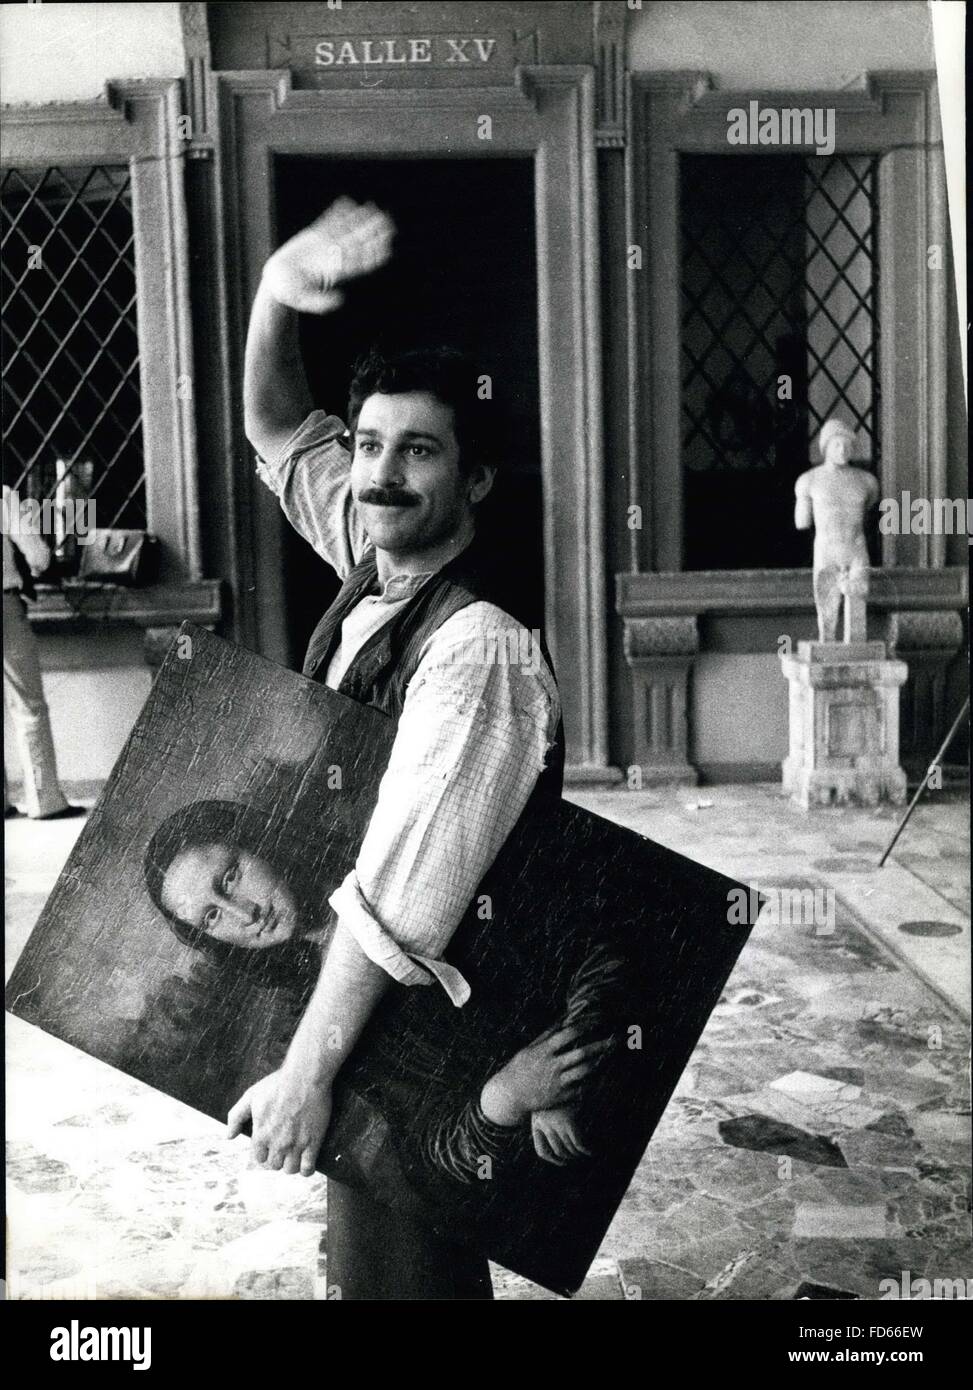 1968 - Rome: The Italian Television Br. is turning a special regarding the famous ''the theft of te Gioconda'' that taken place in the Museum of Louvre in Paris. The sector Enzo Cerusico is playing the role of Tommaso Perugia the theif of the peinture Photo Shows Actor Enzo Cerusico, as the thief Tommaso Perugia, in action. © Keystone Pictures USA/ZUMAPRESS.com/Alamy Live News Stock Photo